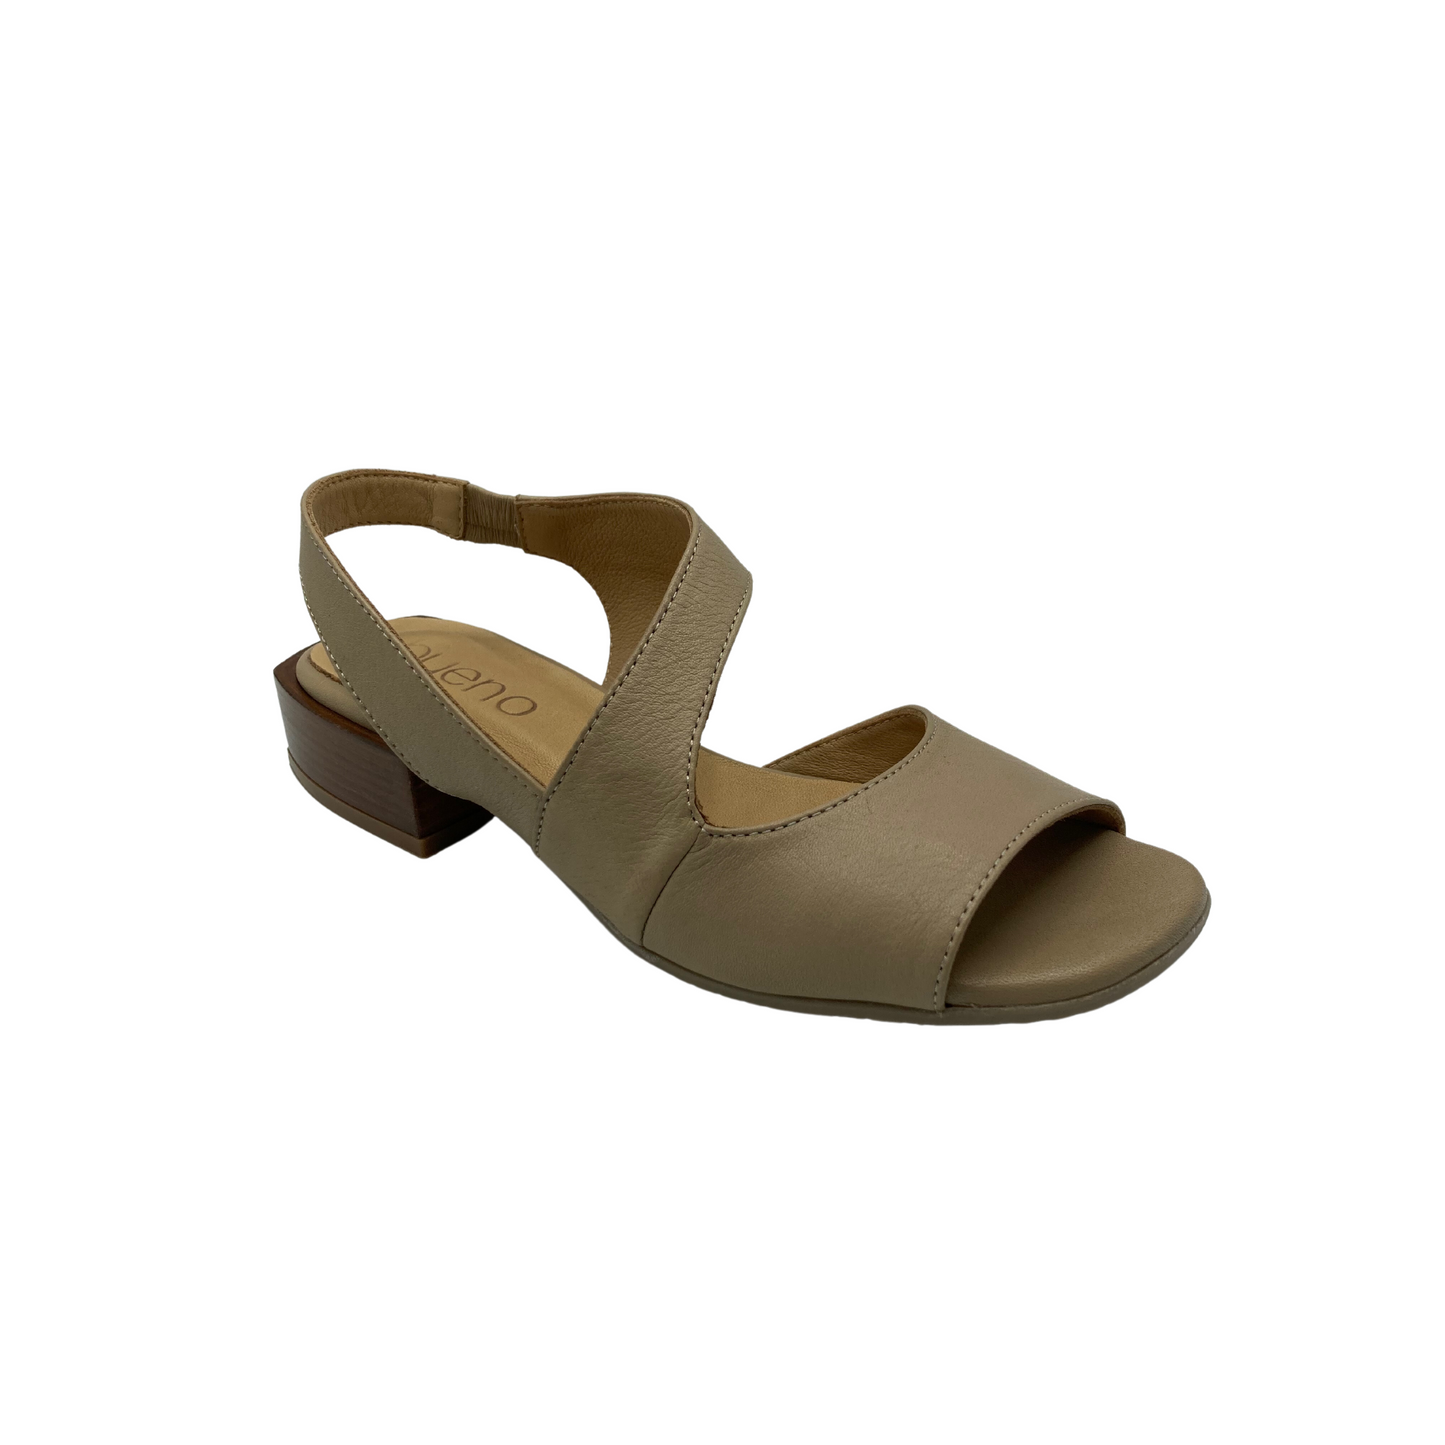 Low heeled sandal with open toe.  Curved arch strap over forefoot with strap across the top of foot.